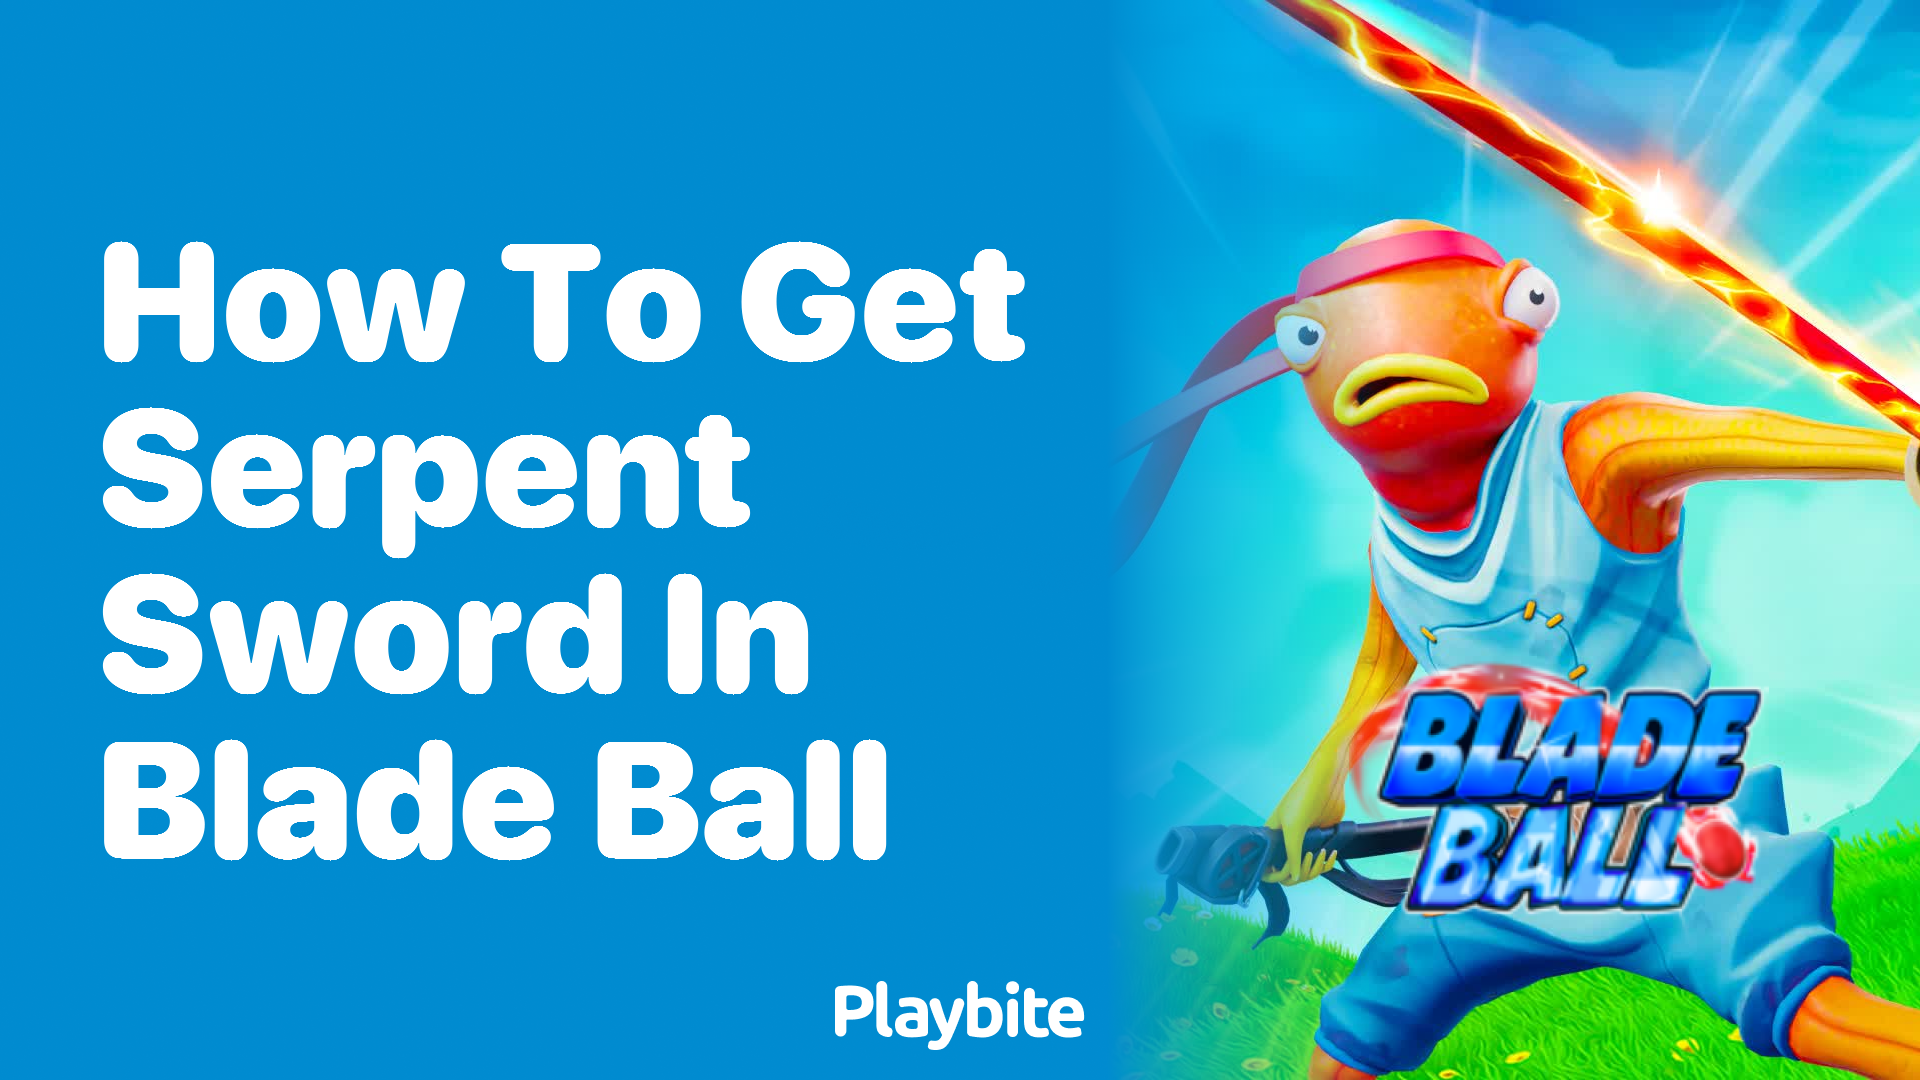 How to Get the Serpent Sword in Blade Ball